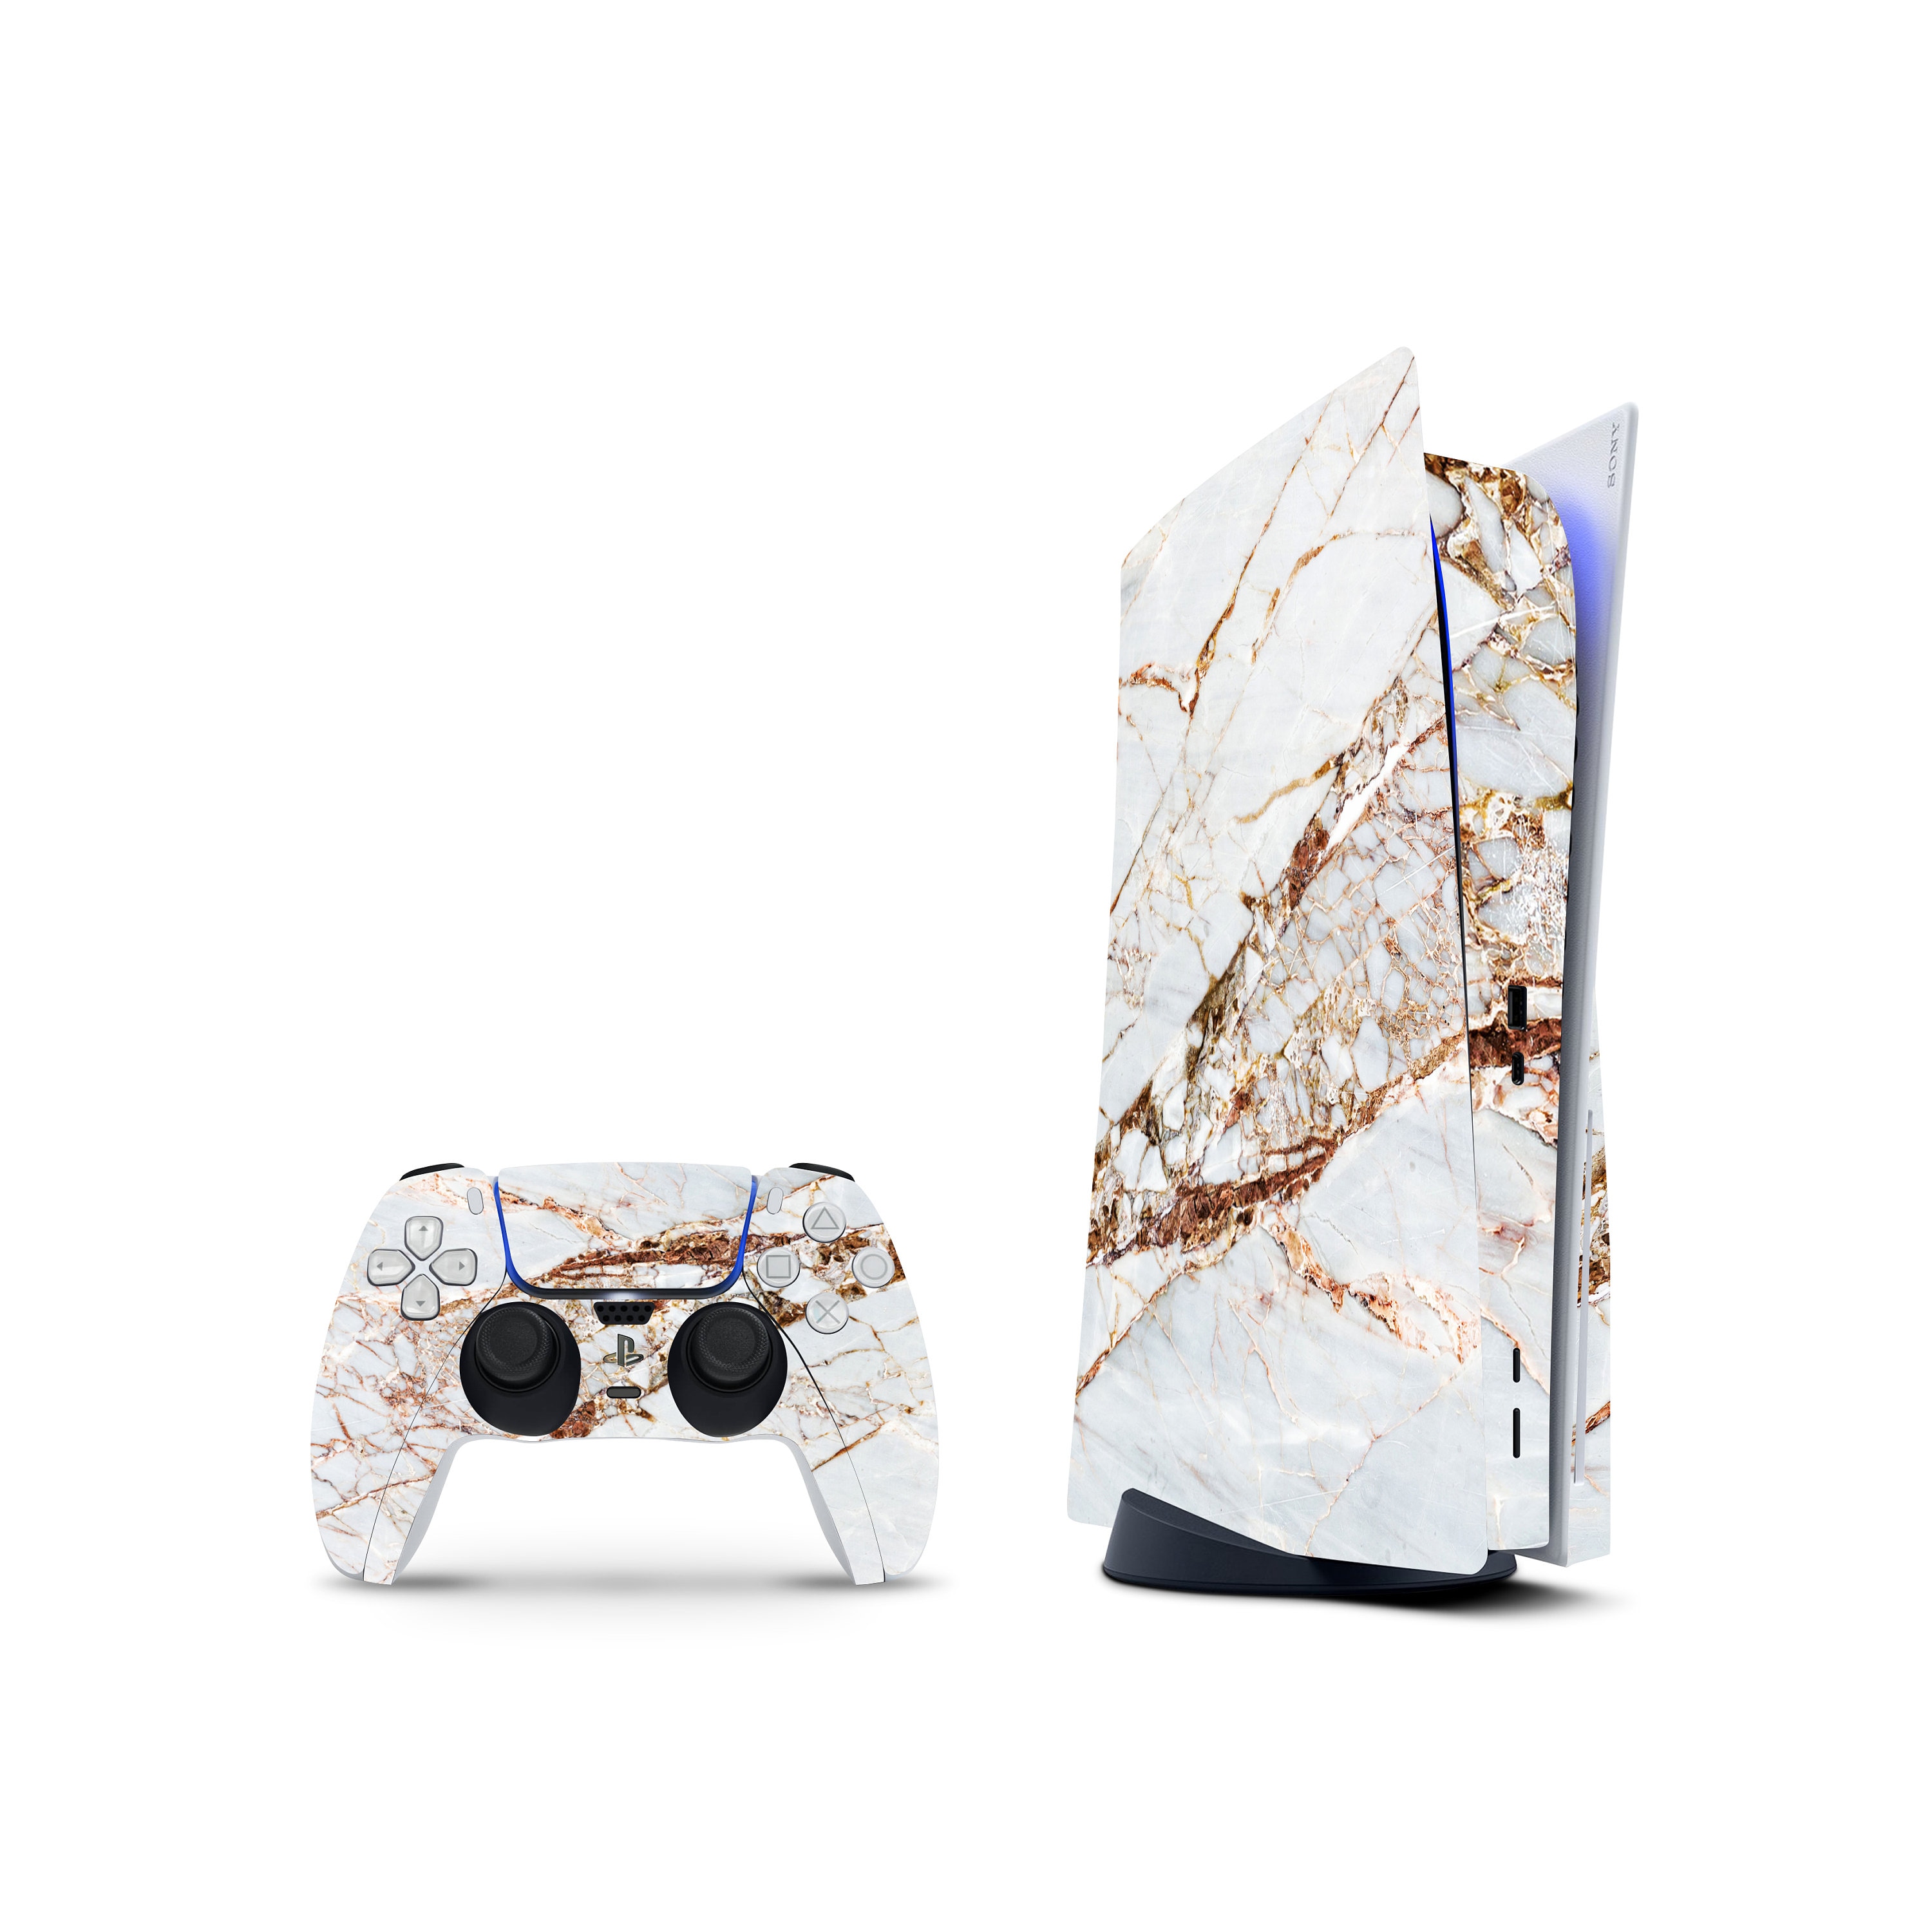 PlayStation 5 Golden Console Cover – Console Skin Case